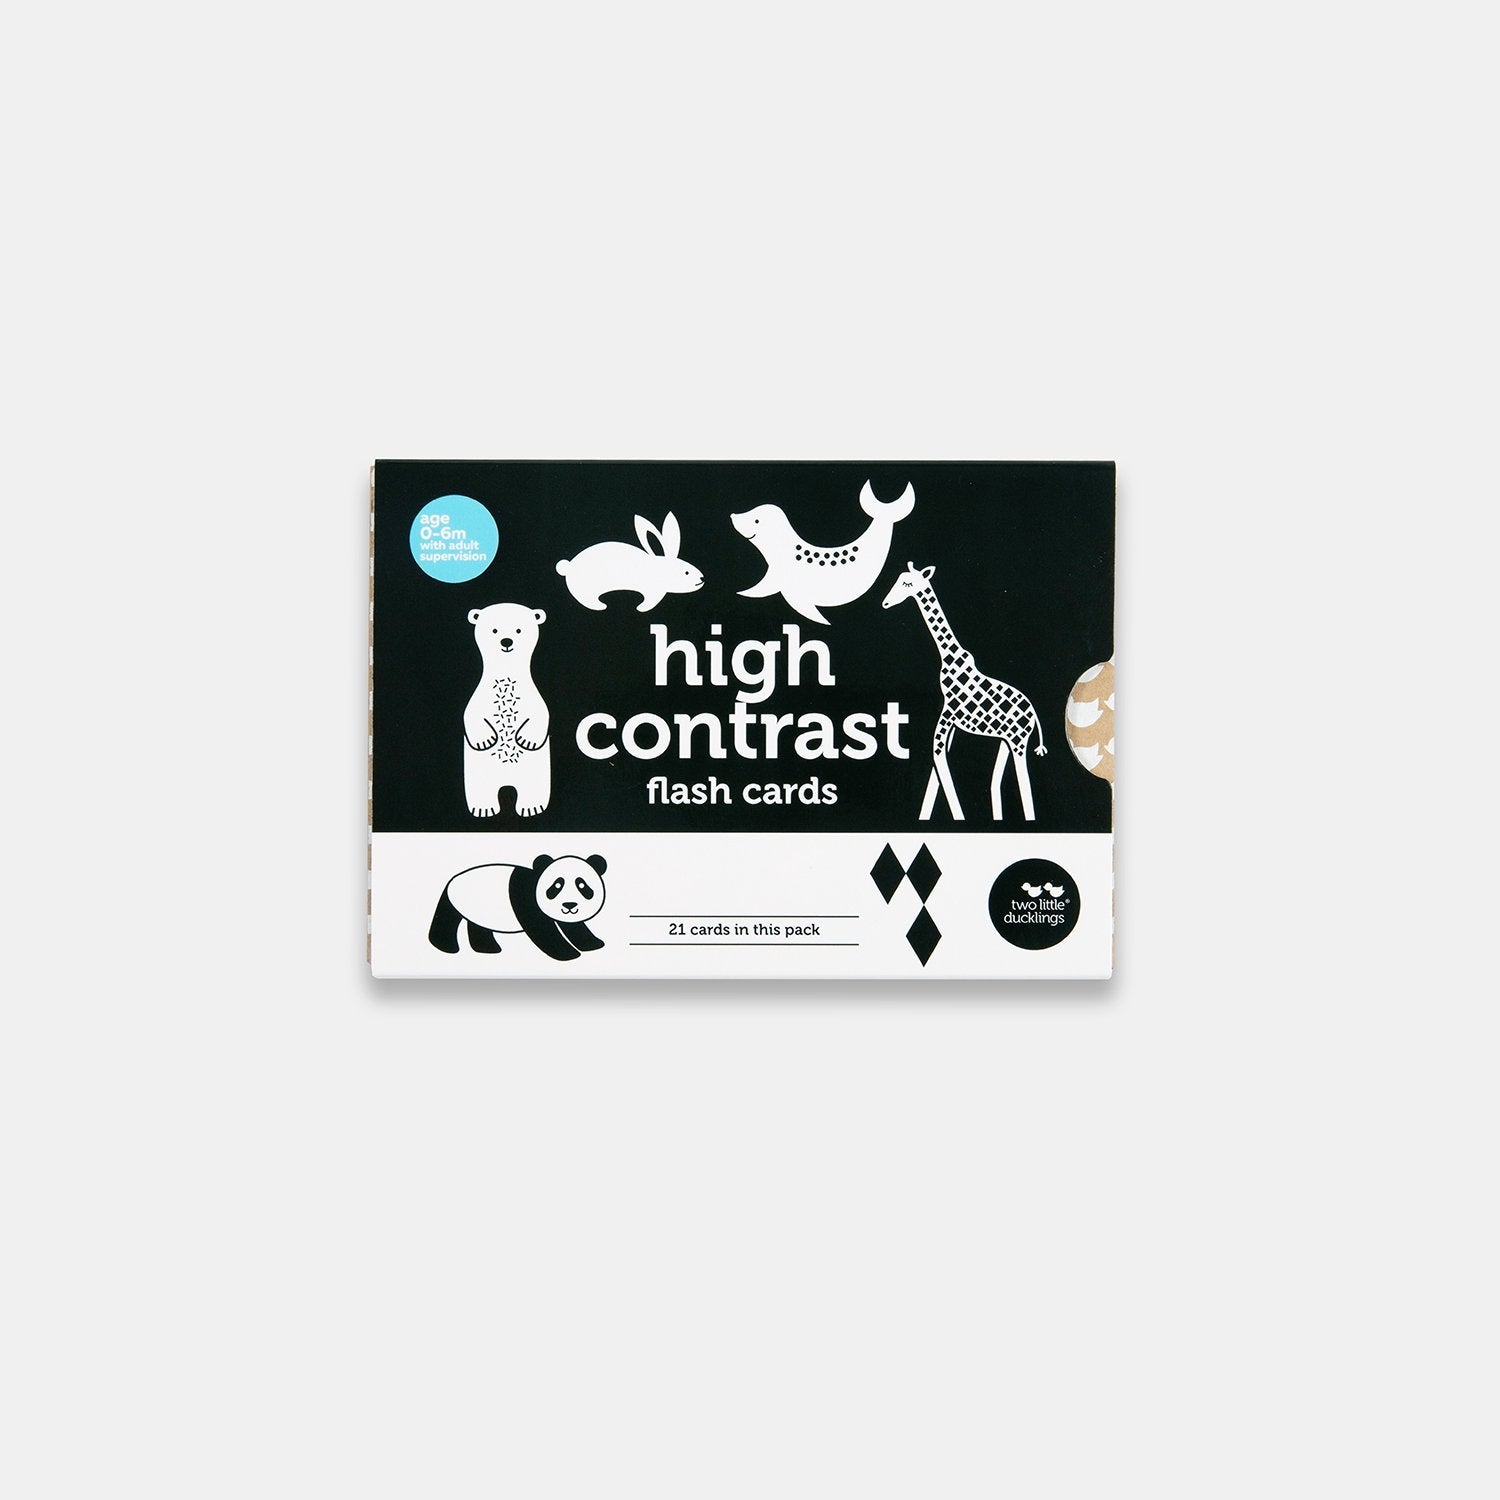 HIGH CONTRAST FLASH CARDS by TWO LITTLE DUCKLINGS - The Playful Collective